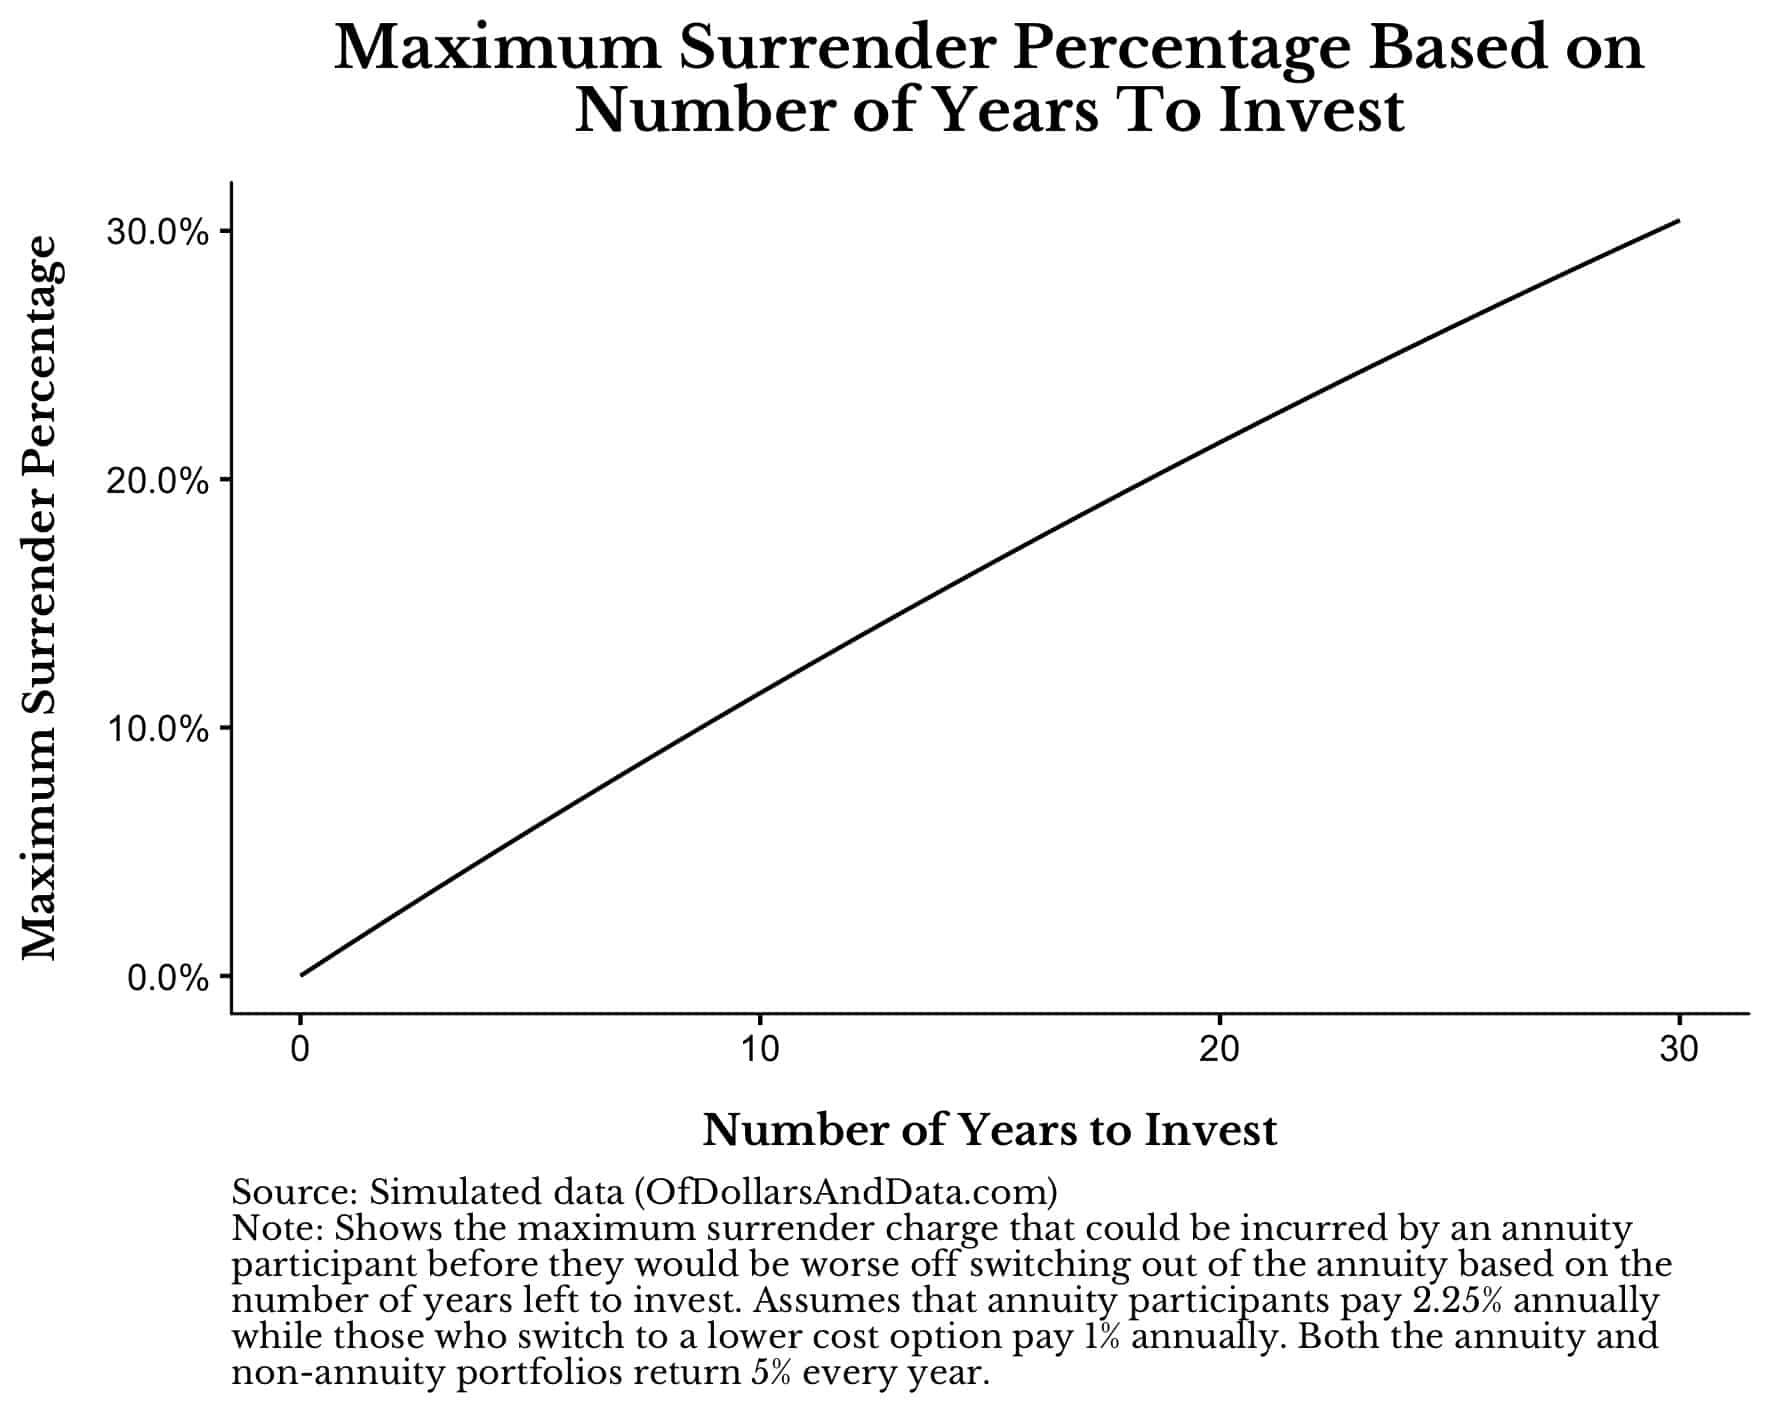 Maximum surrender percentage based on number of years to invest with a 1% fee